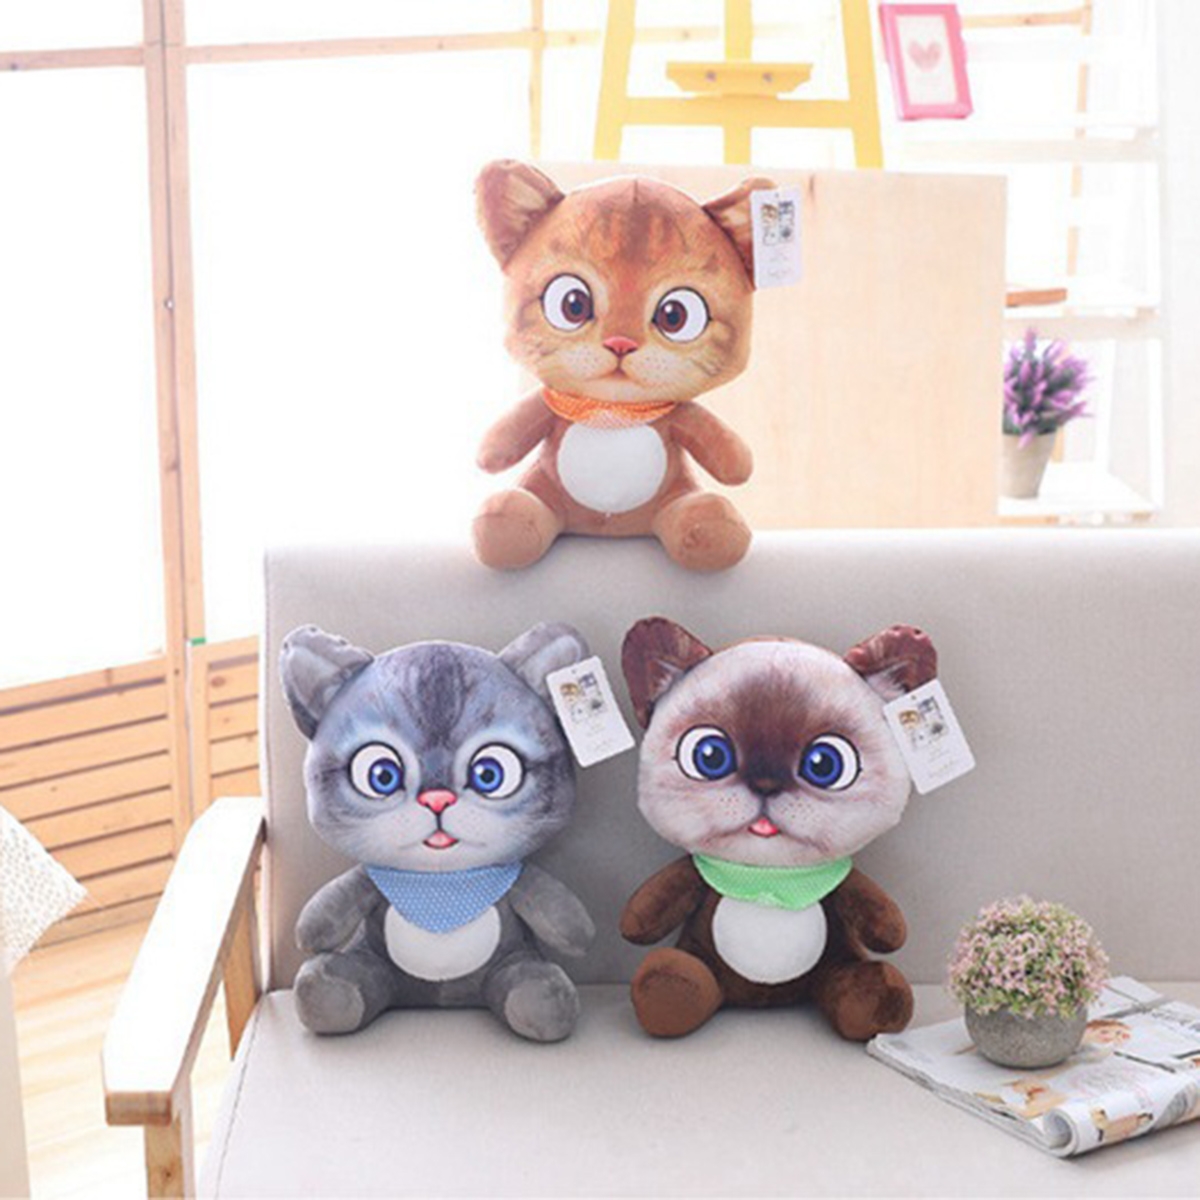 20/30 CM Cute Soft Stuffed Cat Seat Dolls Pillow Cushion Plush Animal Toy for Kids Gifts